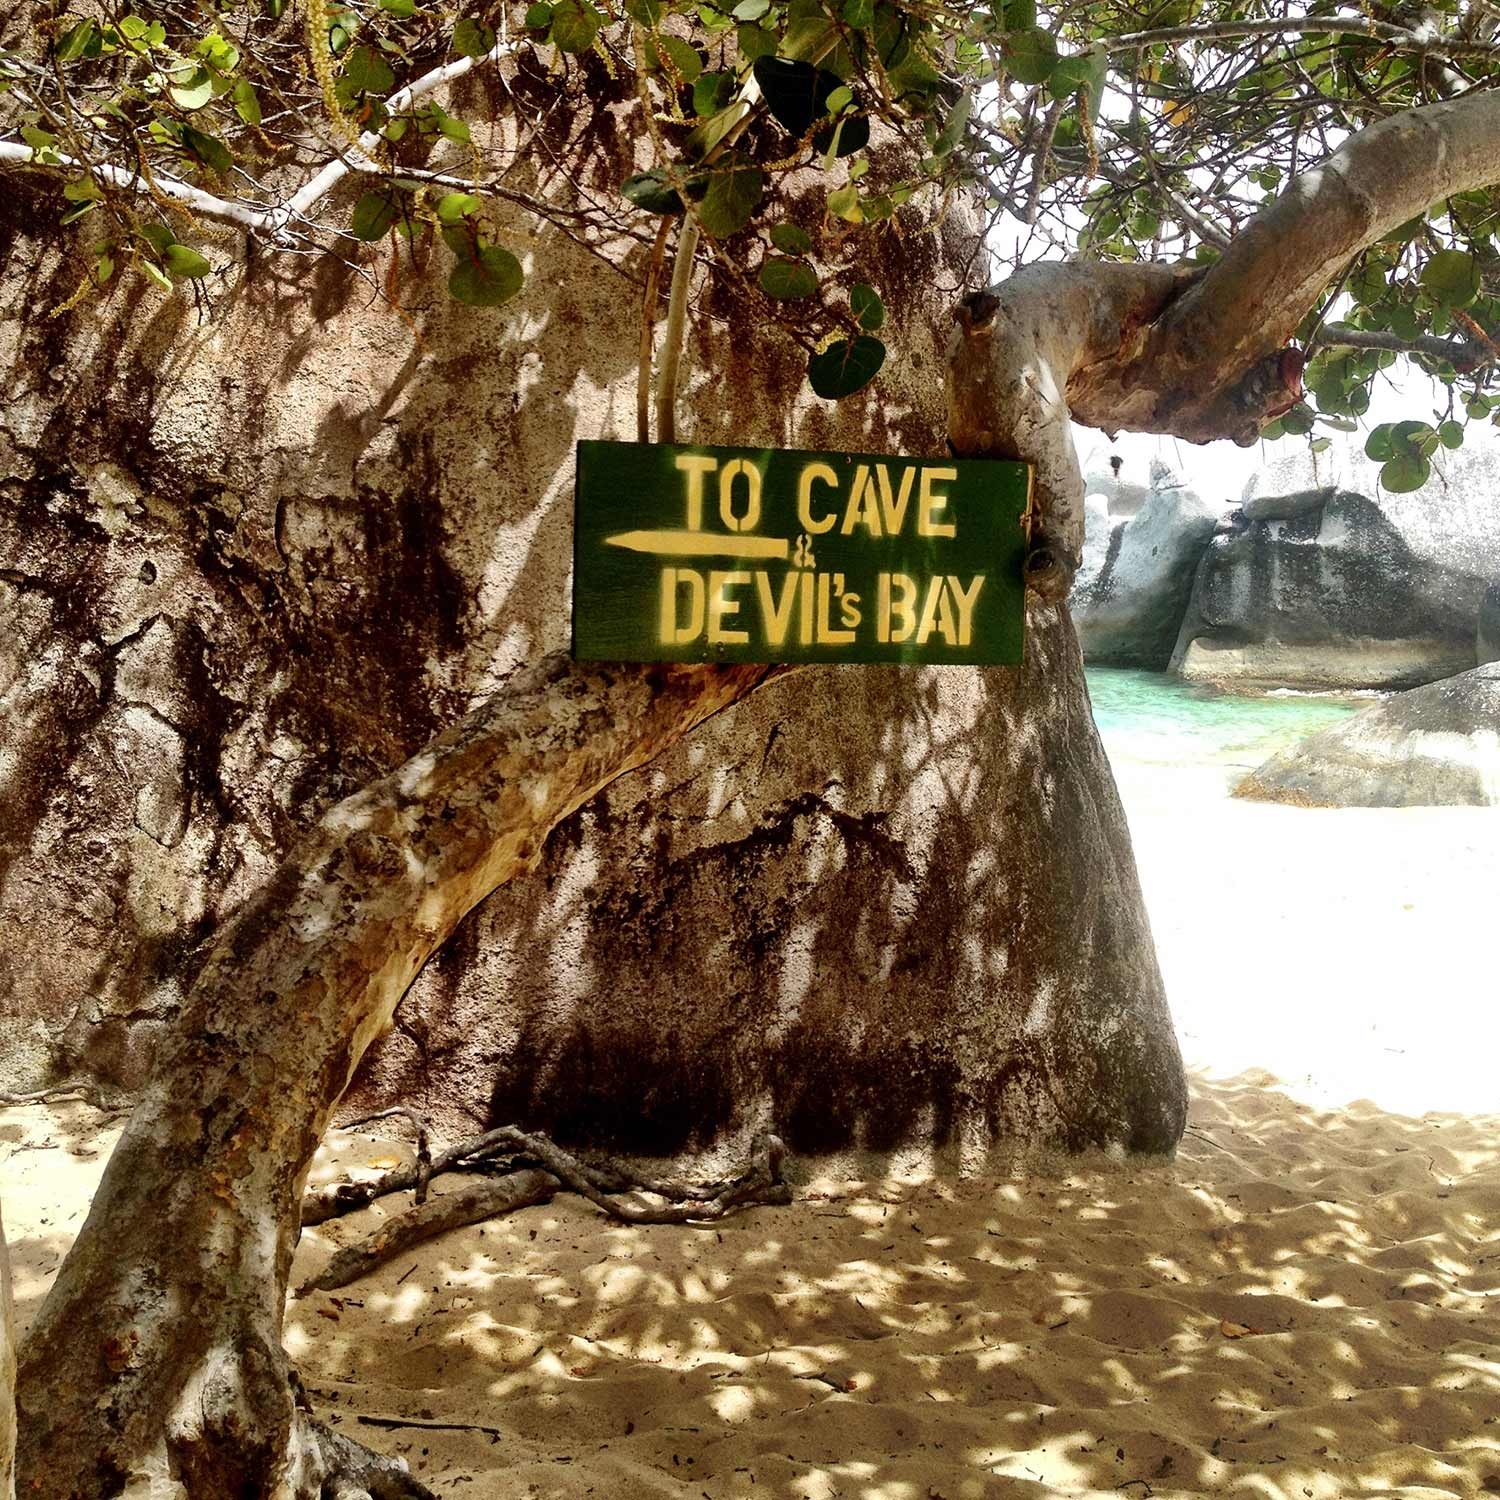 Trees and rocks along the beach with a sign reading 'To Cave and Devils Bay' with an arrow pointing left 